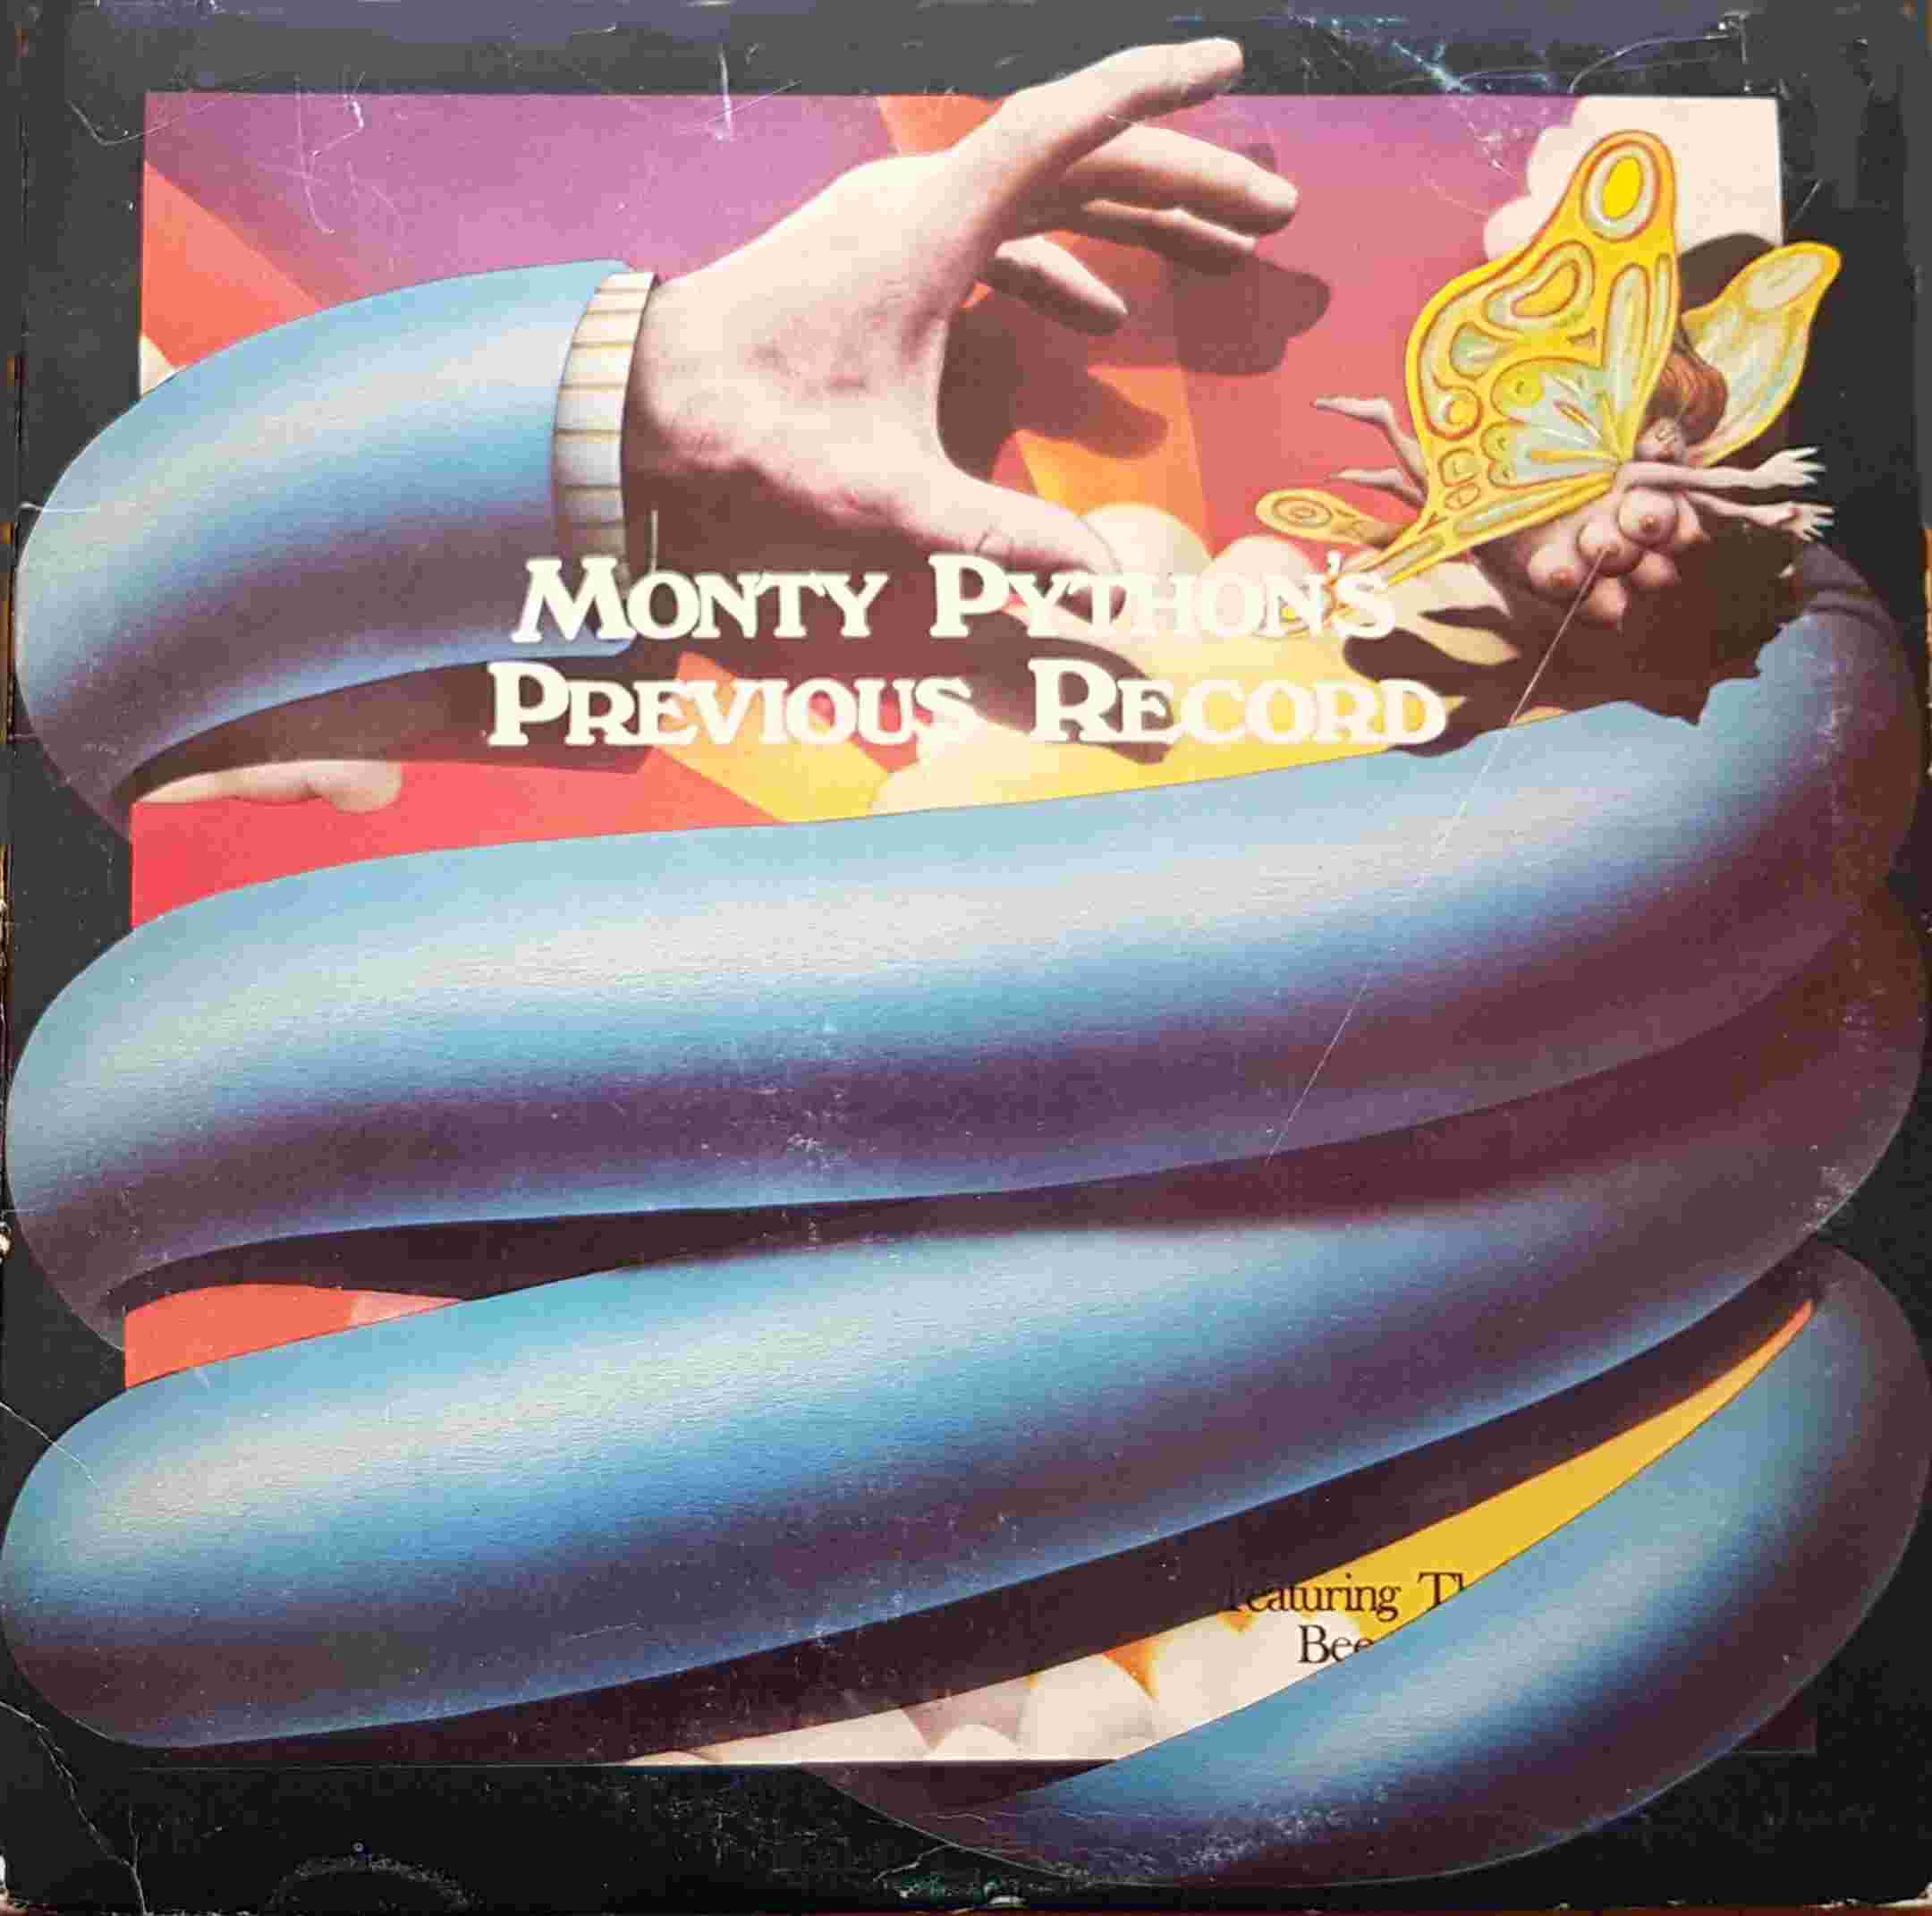 Picture of PYE 12116 Monty Python's previous record - US import by artist Monty Python from the BBC albums - Records and Tapes library